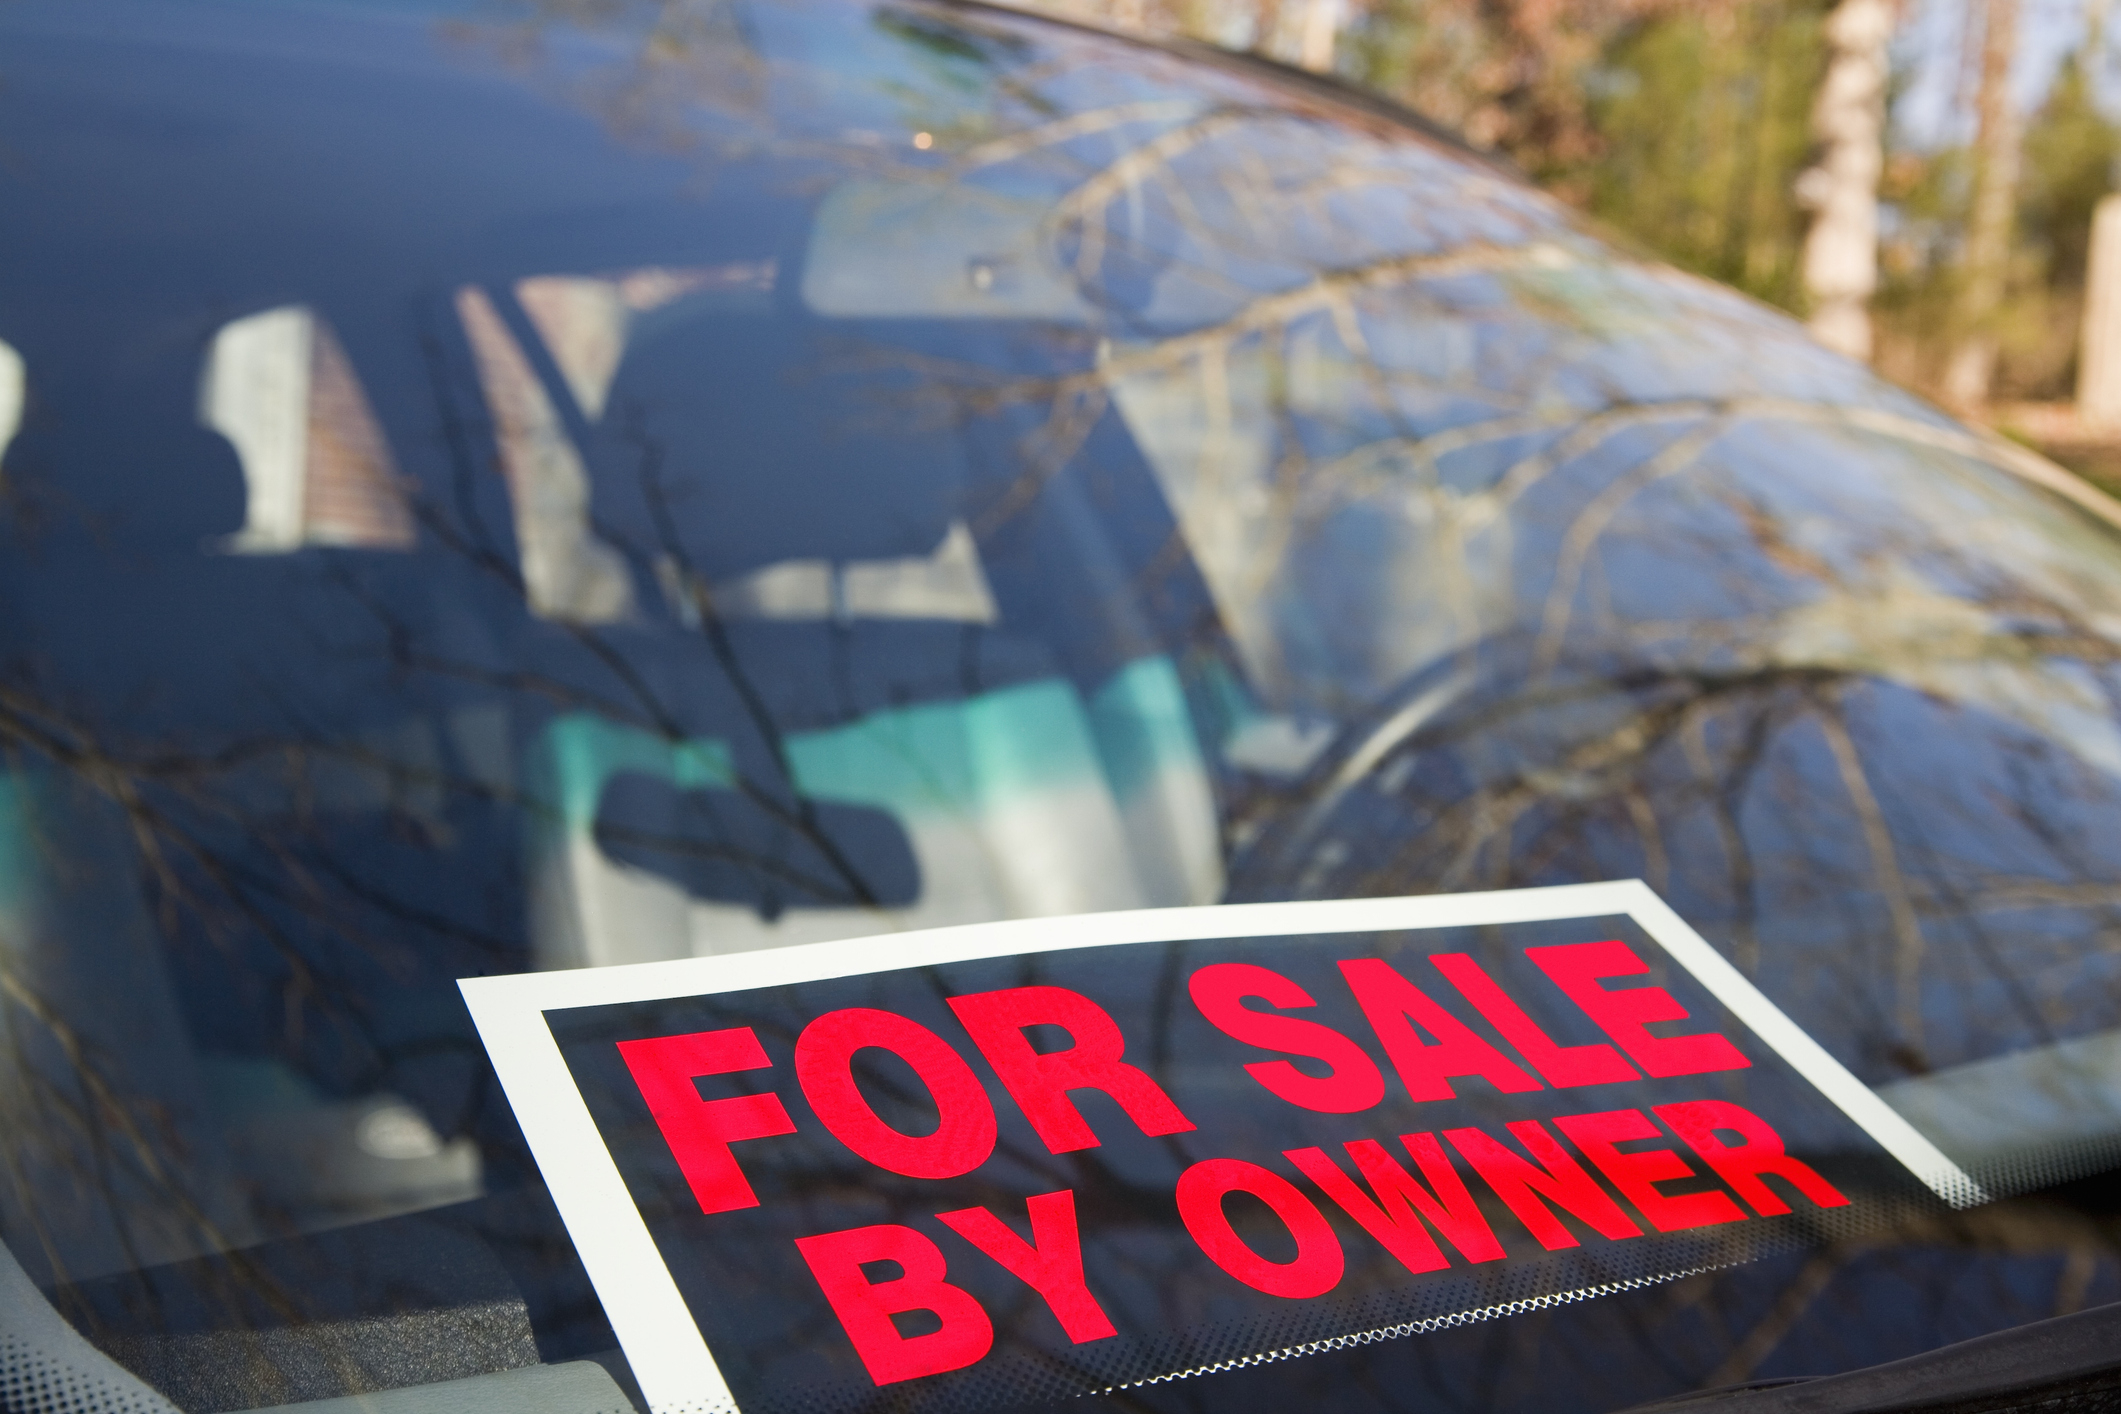 Sign on car windshield reads &quot;FOR SALE BY OWNER&quot;